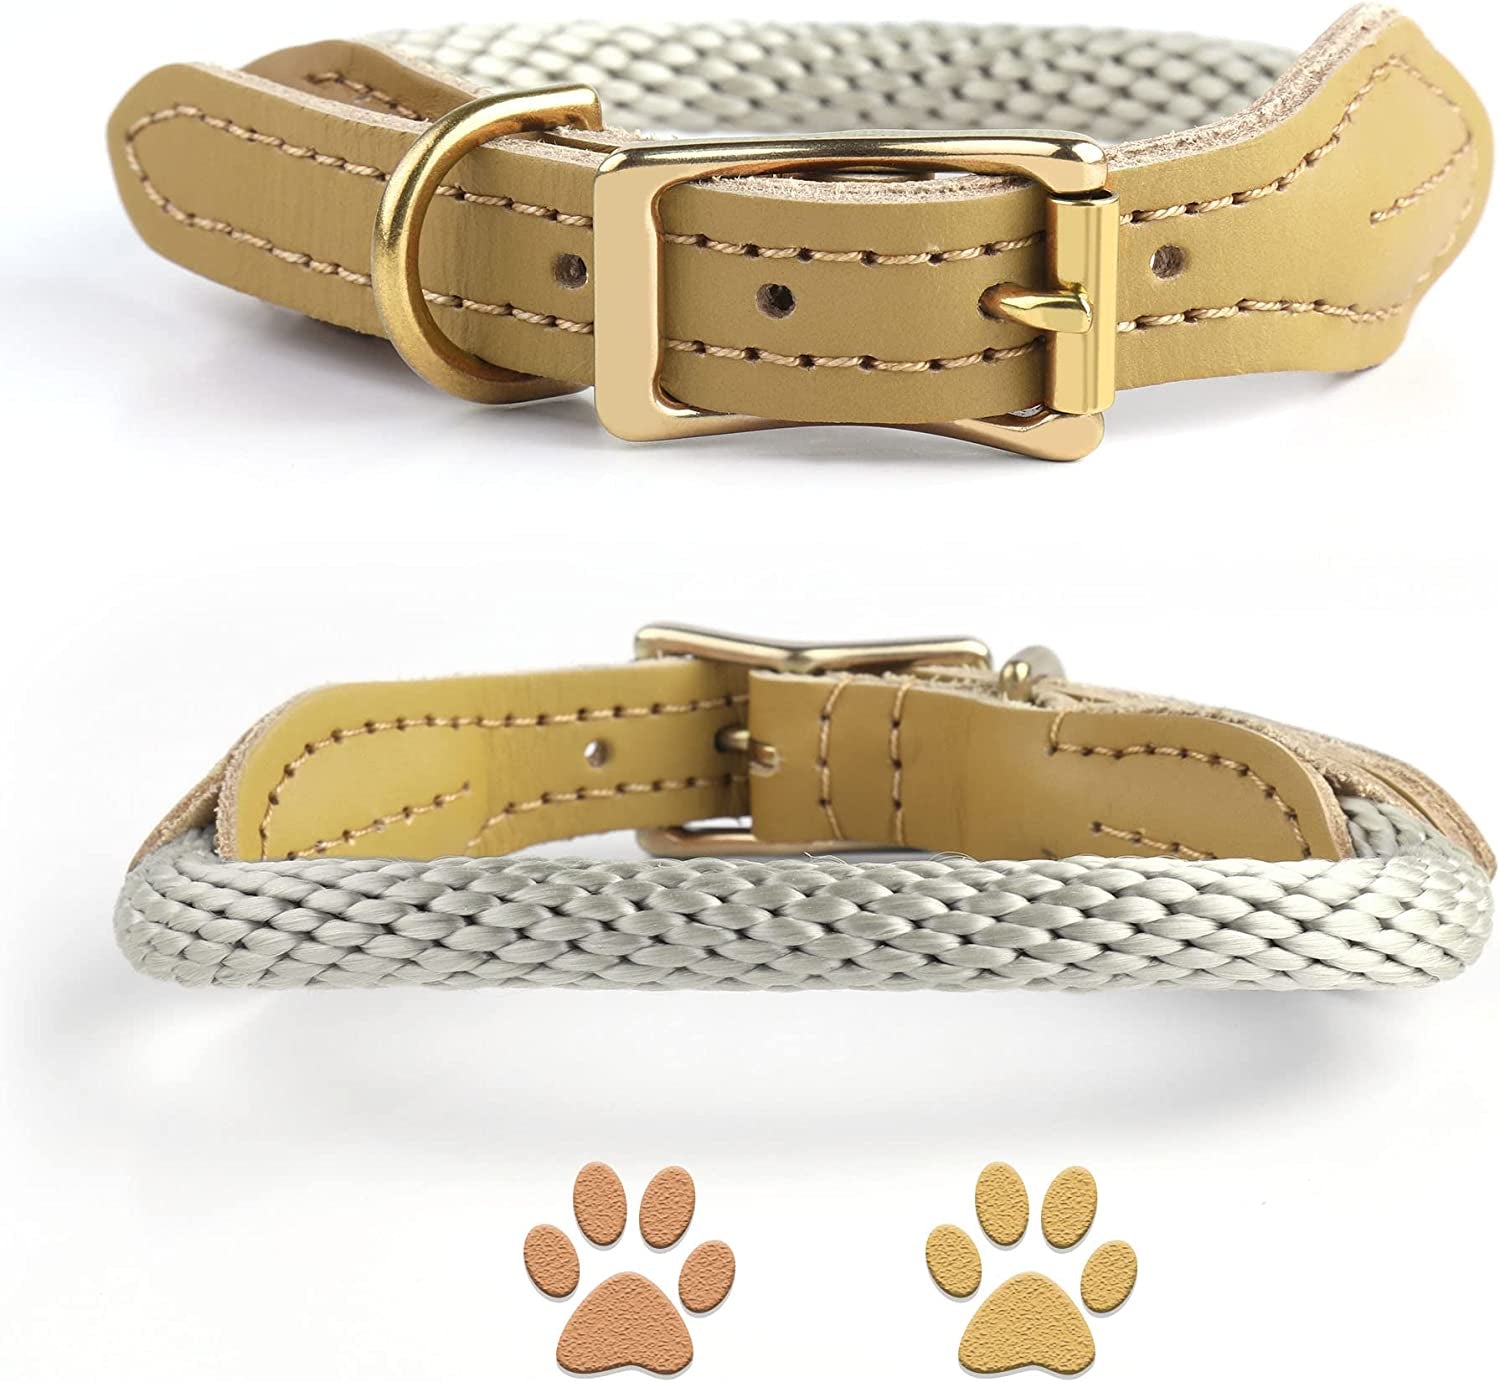 Decorbea Airtag Holder- Airtag Dog Collar Holder(2 Pack)- Dog Airtag Holder in Fashionable Design -PU Leather Pet Collar Case for Apple Airtags Electronics > GPS Accessories > GPS Cases Decorbea Khaki Dog Collars (Pack of 1) Collar(M/L):15.8"-18.9" 